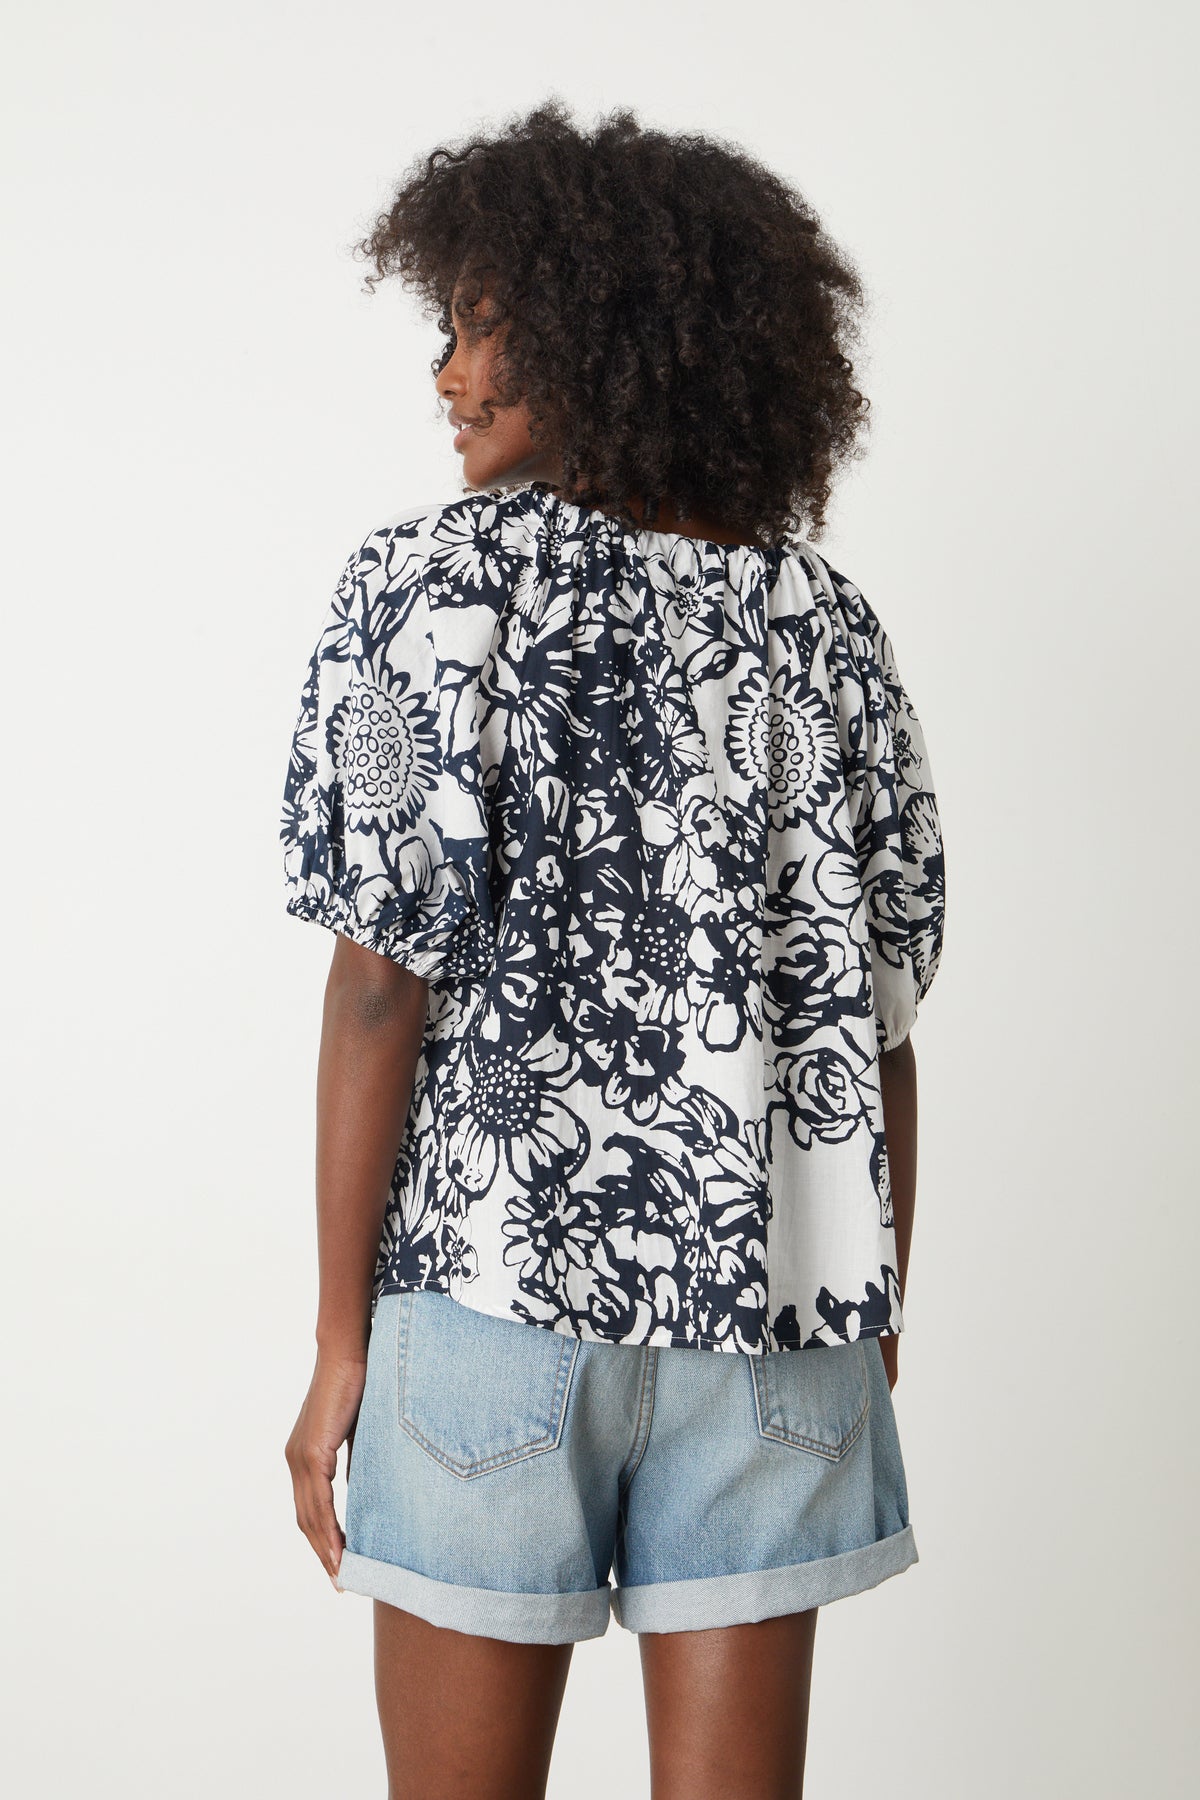   The back view of a woman wearing a Velvet by Graham & Spencer ANGELA PRINTED BOHO TOP. 